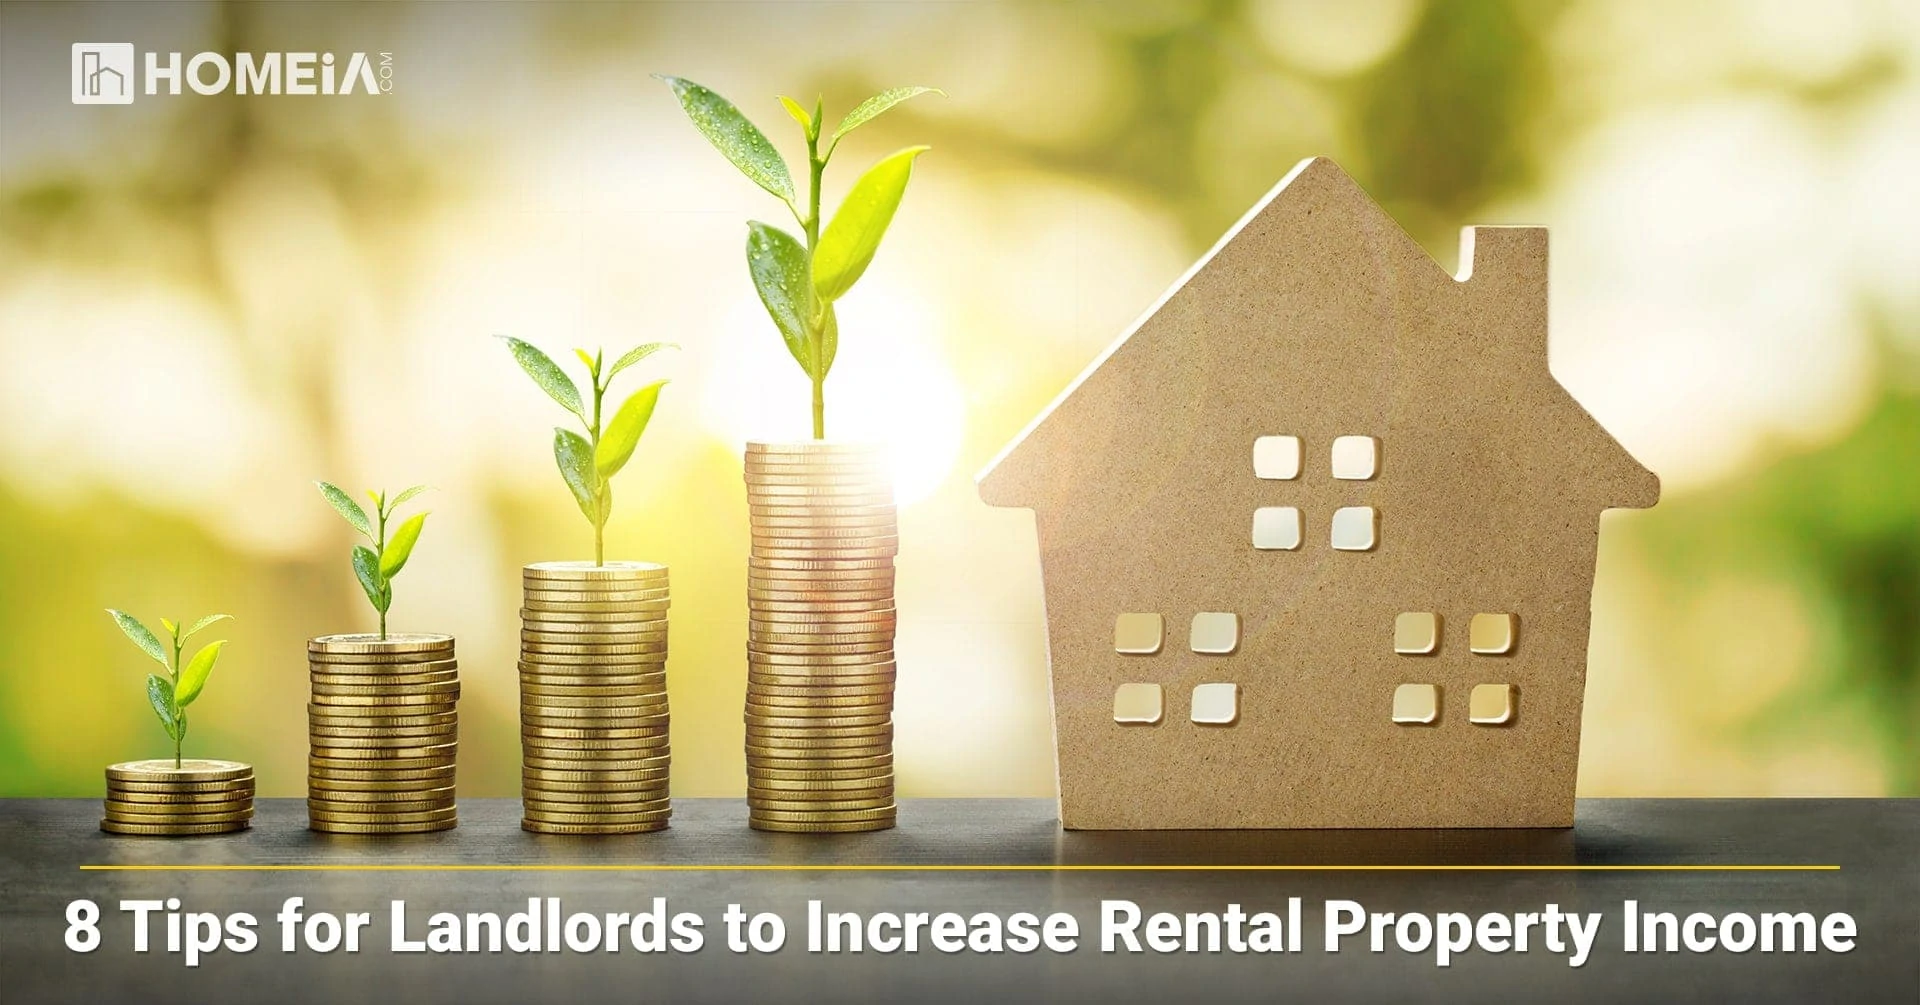 8 Tips for Landlords to Increase Rental Property Income